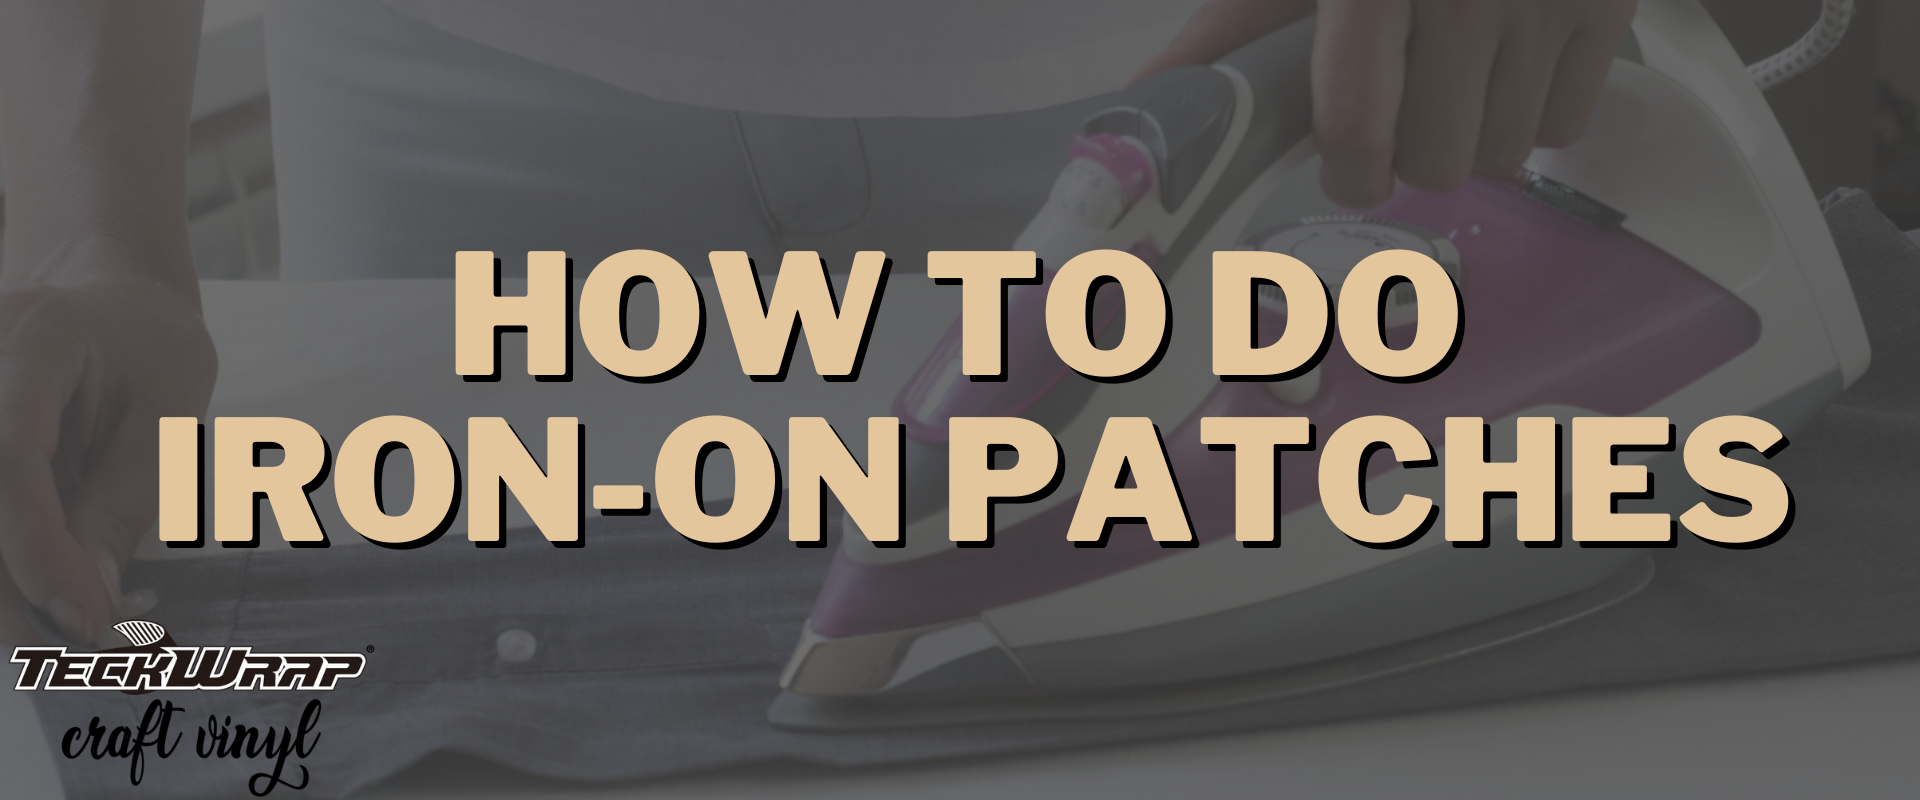 How To Do Iron-On Patches